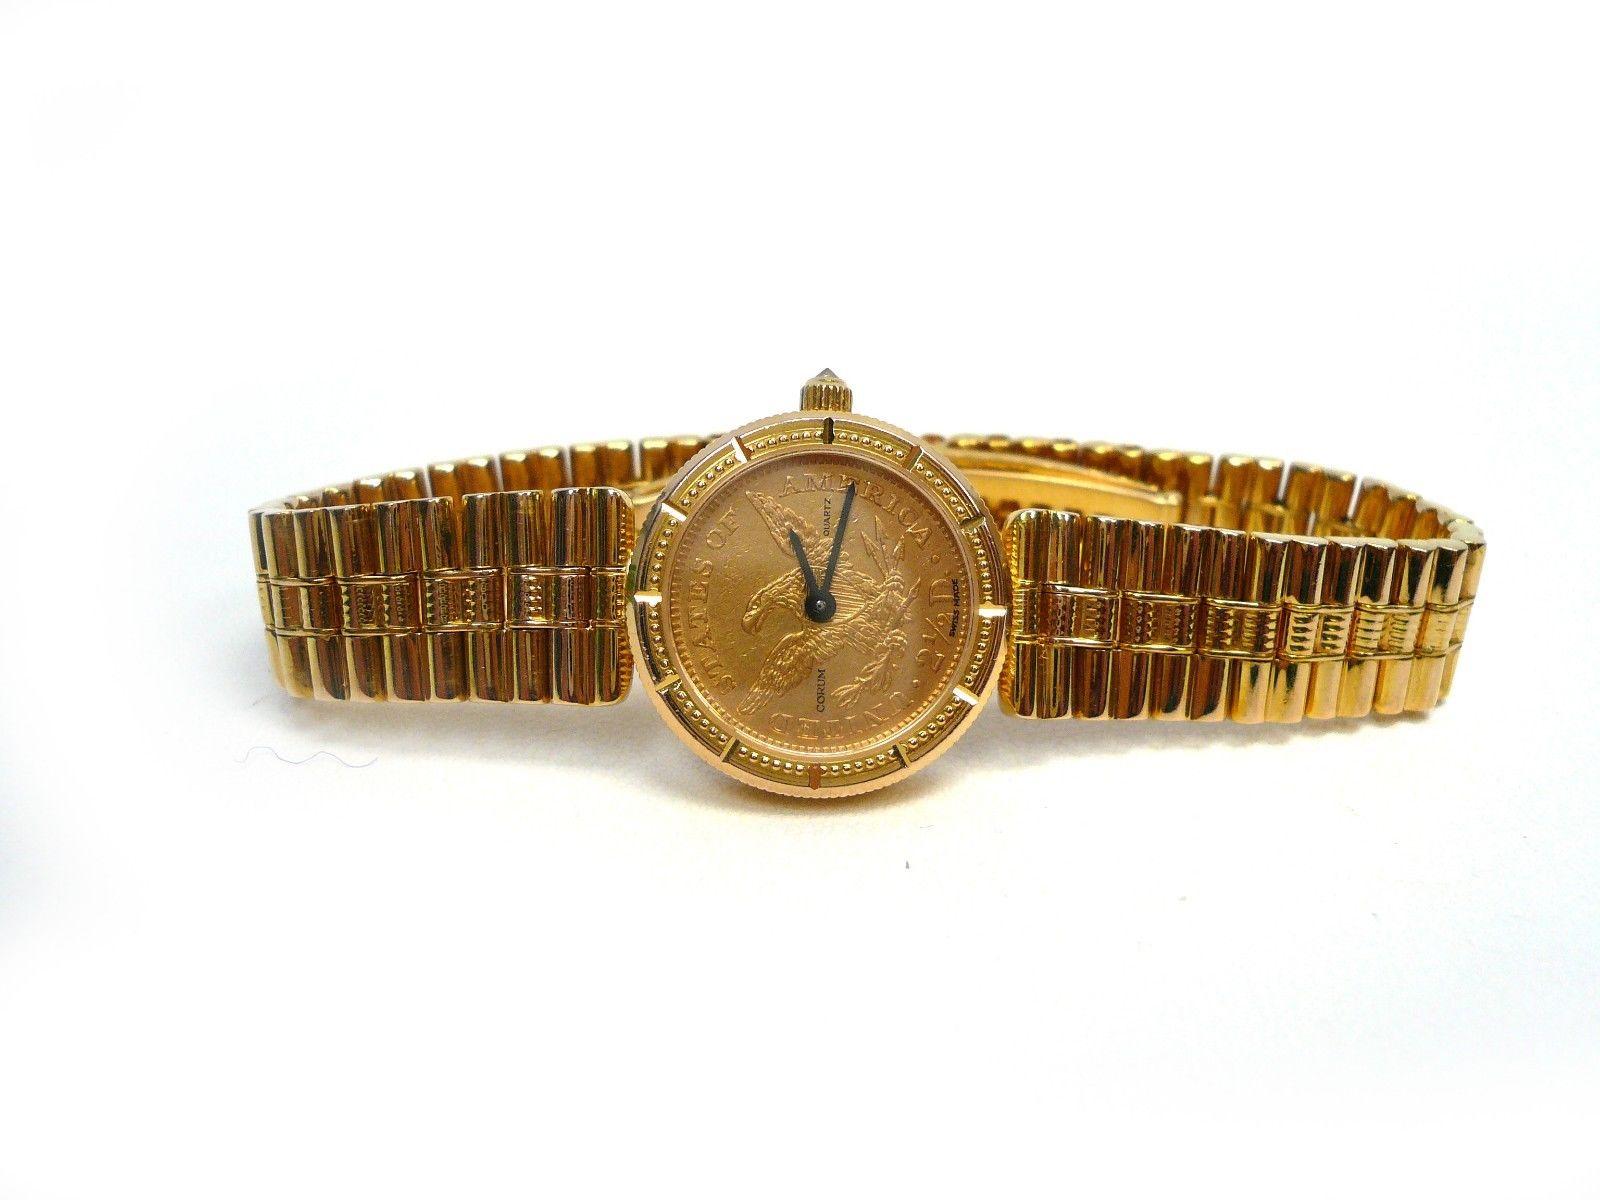 Solid 18k gold Corum Ladies dress watch that features an 1879 genuine gold coin on the dial. This was a special edition by Corum, the authentic gold piece was halved and cushioned in between is an ultra thin quartz movement, which is accurate to